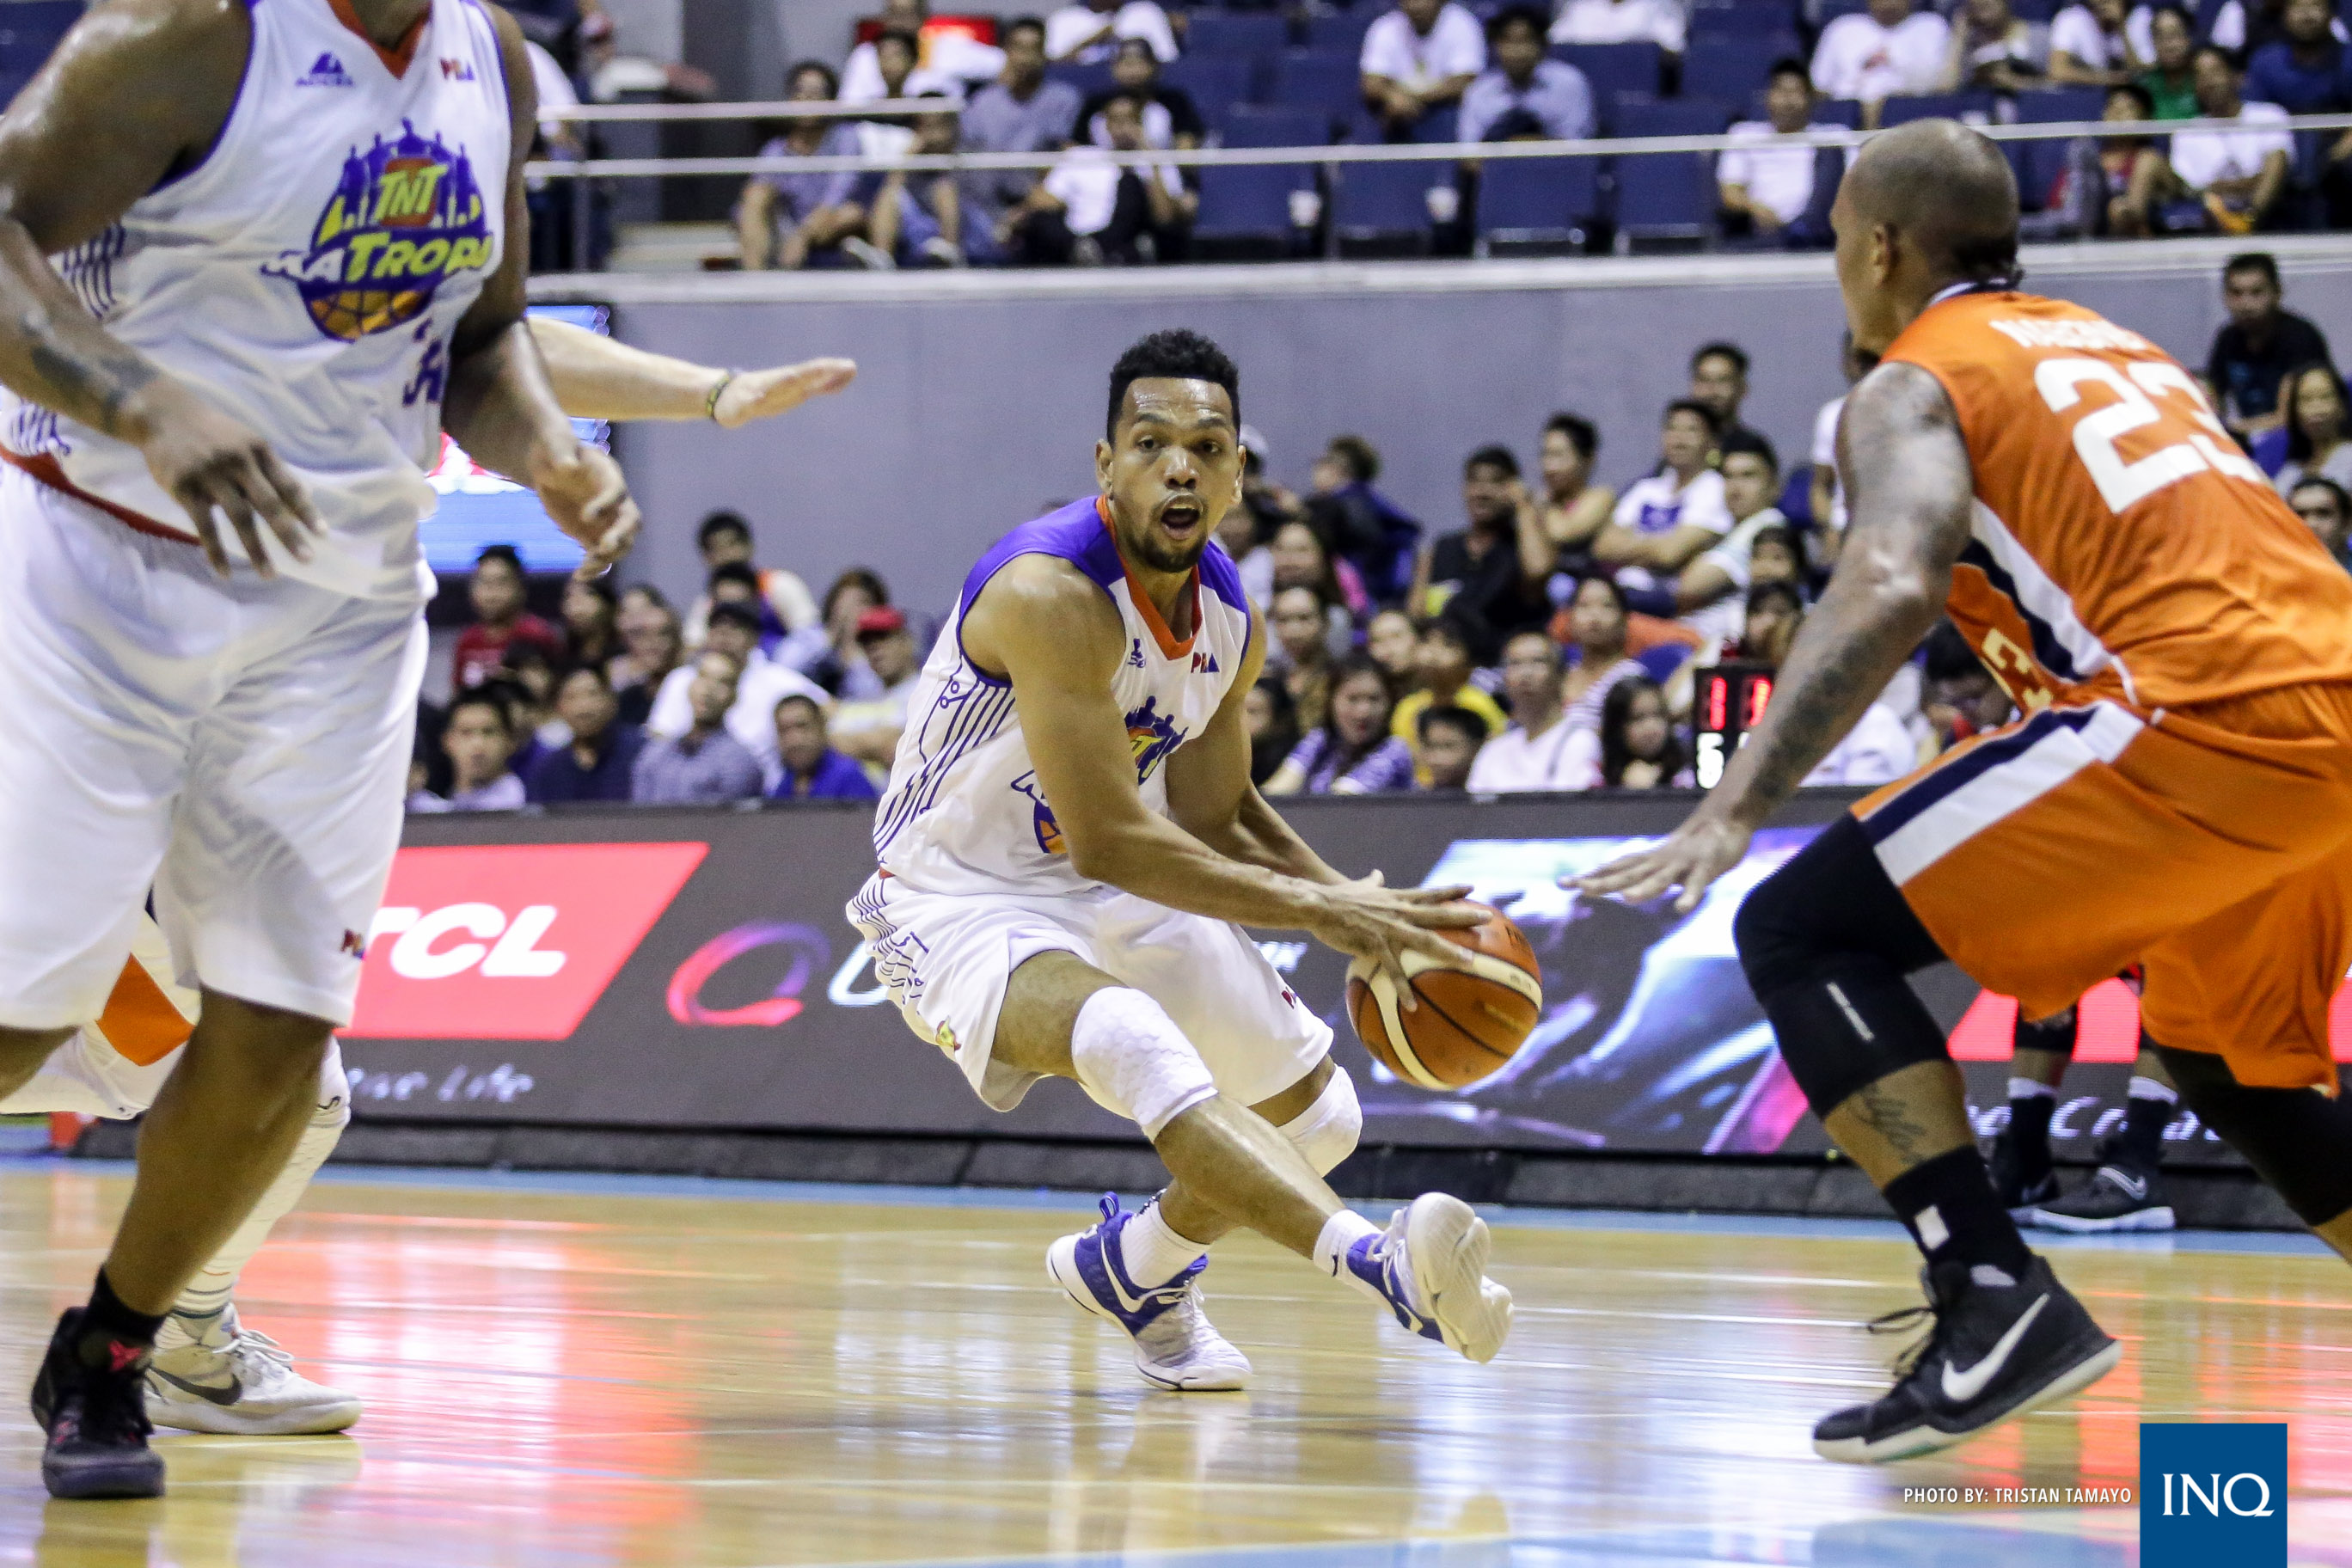 Sense of urgency unleashes intensity out of Castro | Inquirer Sports